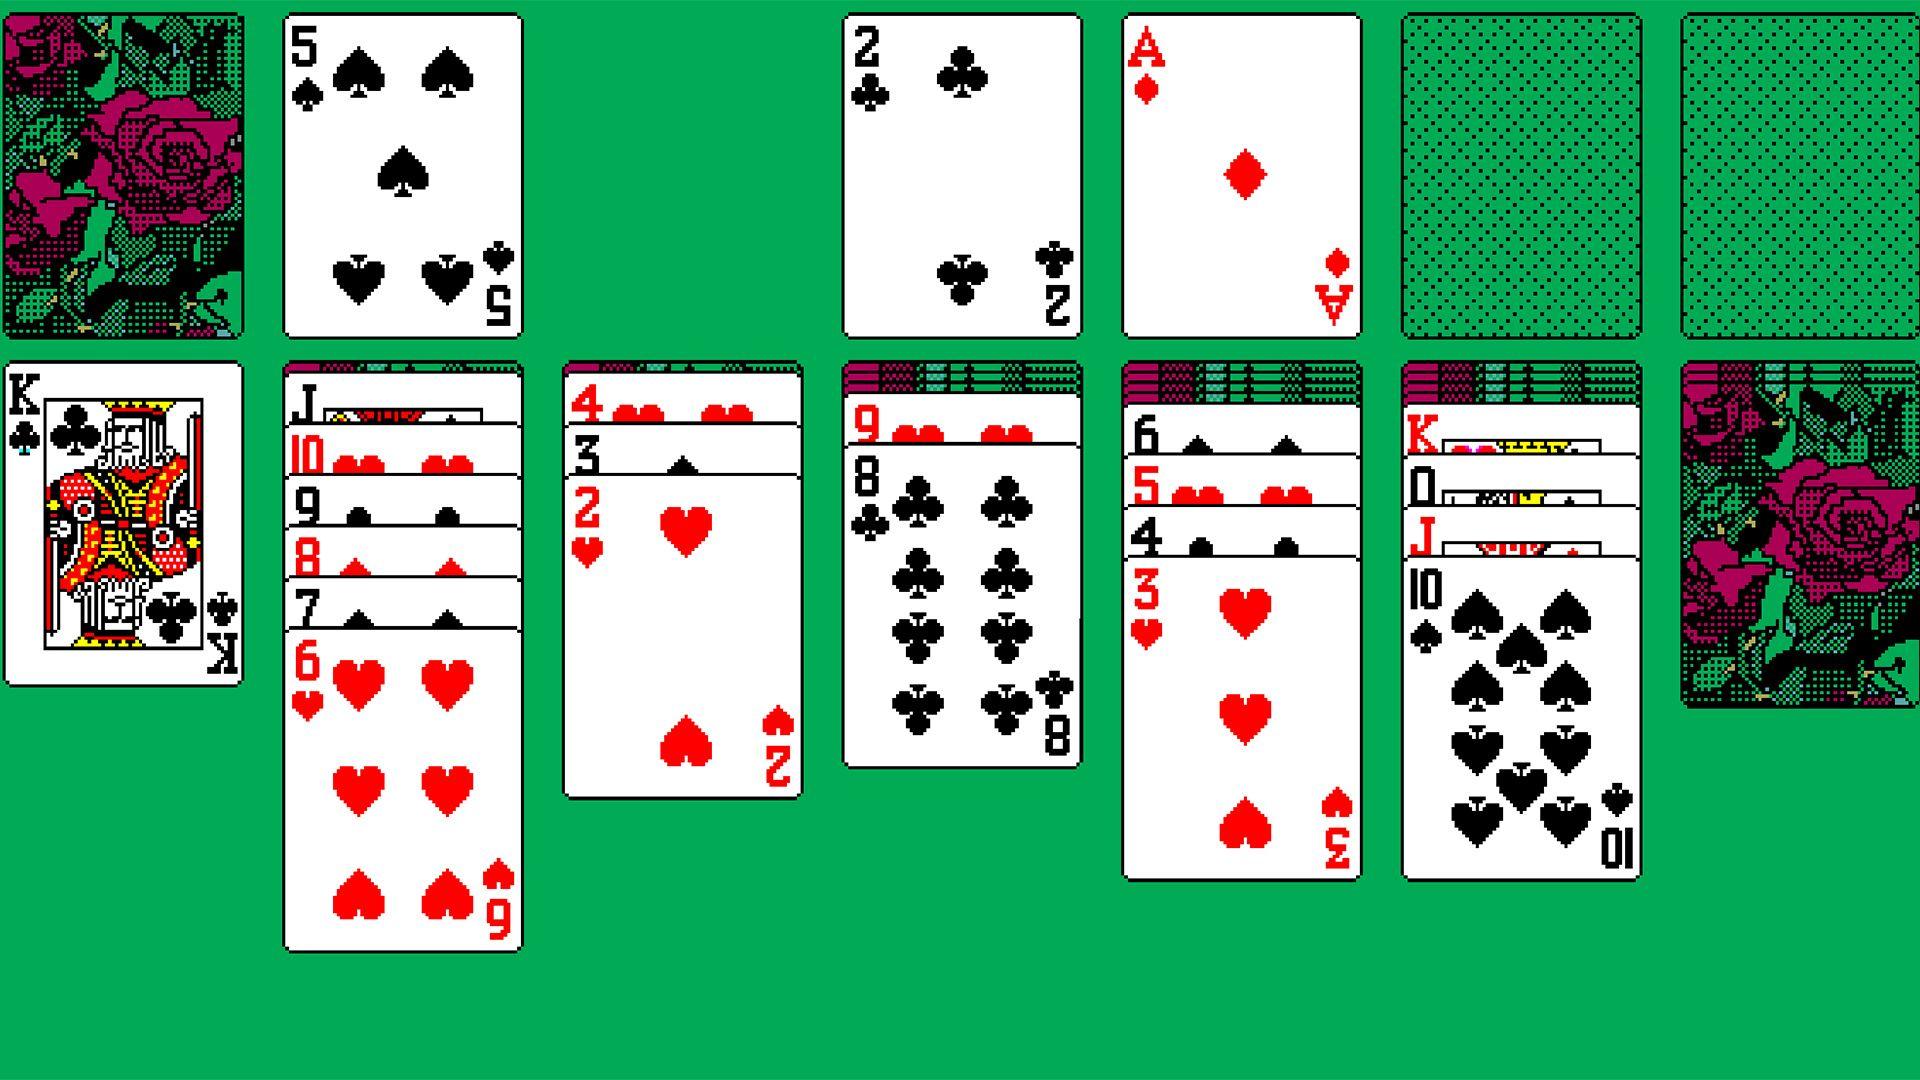 windows 10 free solitaire games download